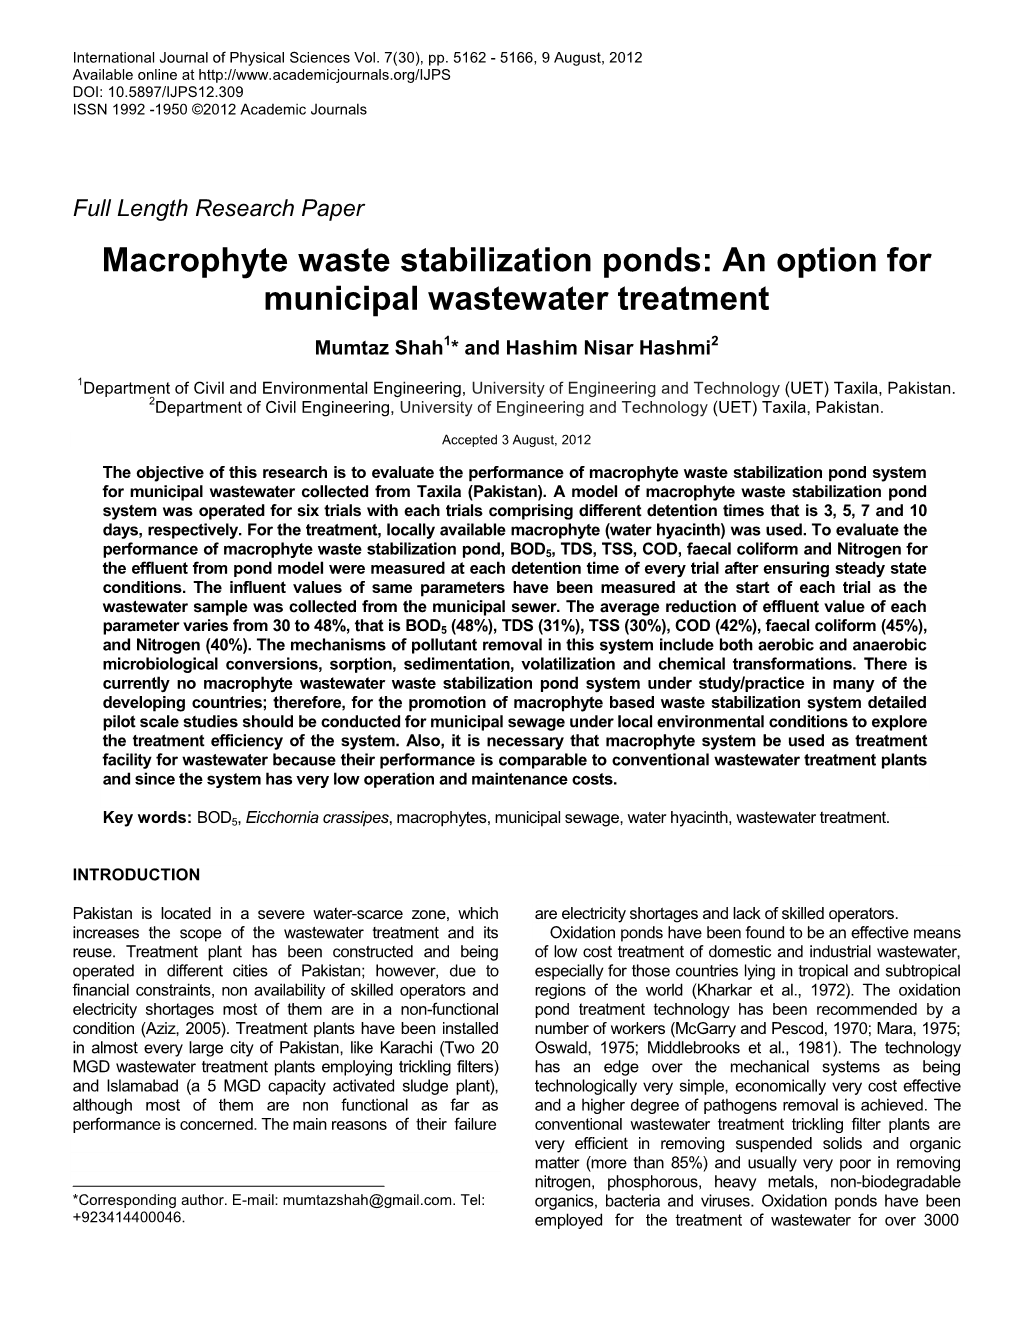 Macrophyte Waste Stabilization Ponds: an Option for Municipal Wastewater Treatment